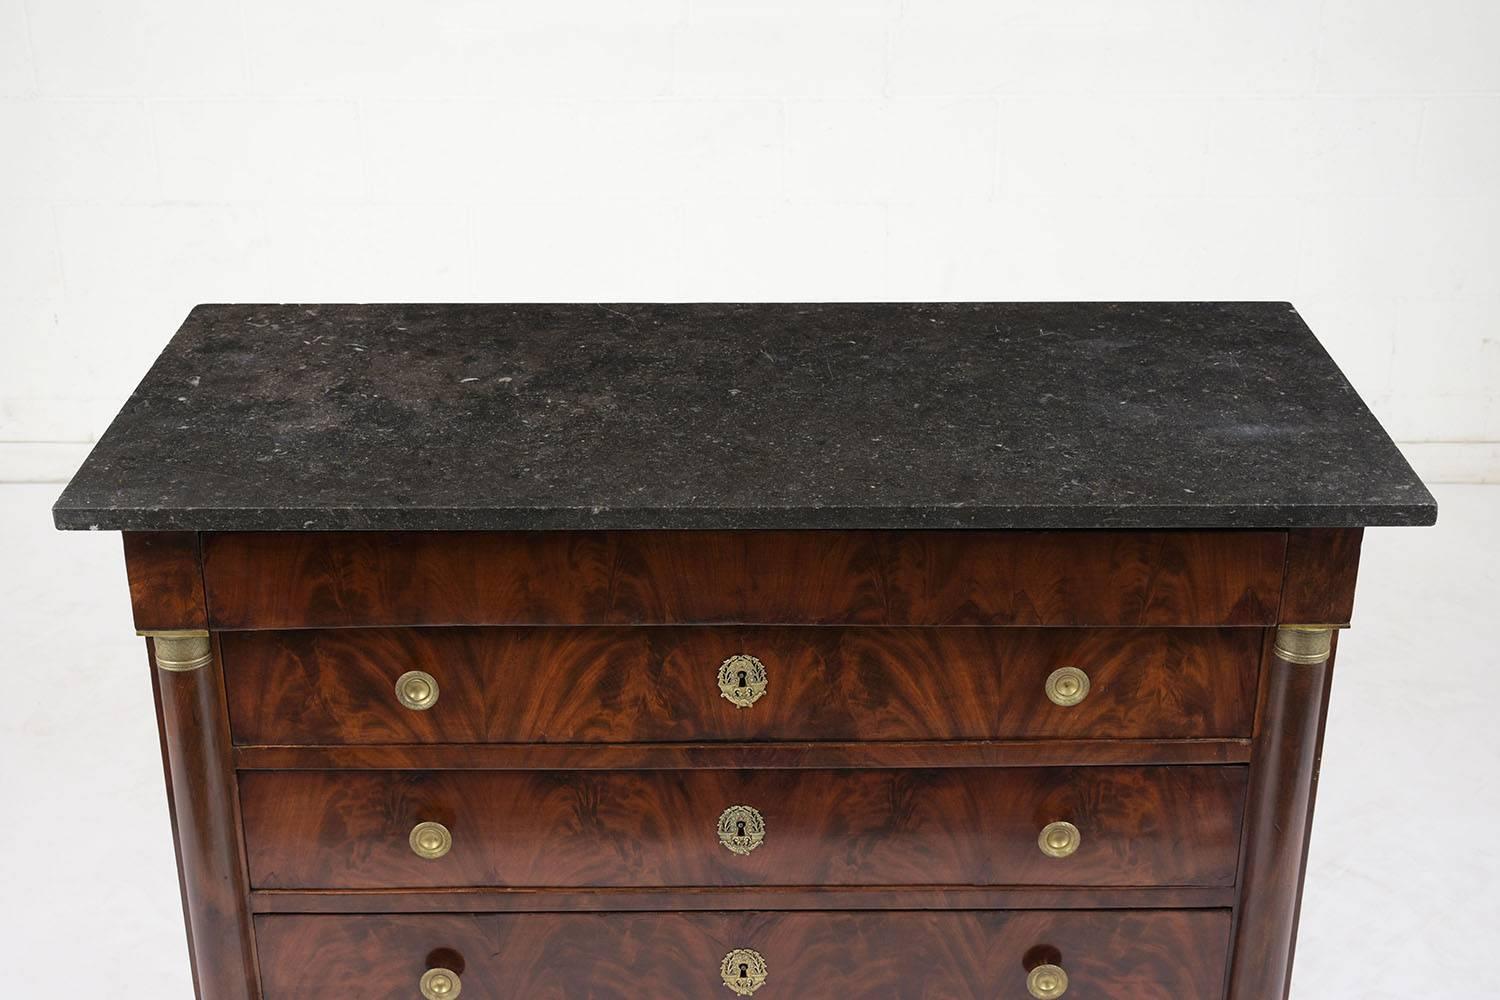 This 1840s French Empire-style commode is covered in Flemish mahogany veneers with the original finish. There are four drawers with the bottom three adorned with decorative bronze pull knobs and keyhole plates. Flanking the drawers are carved